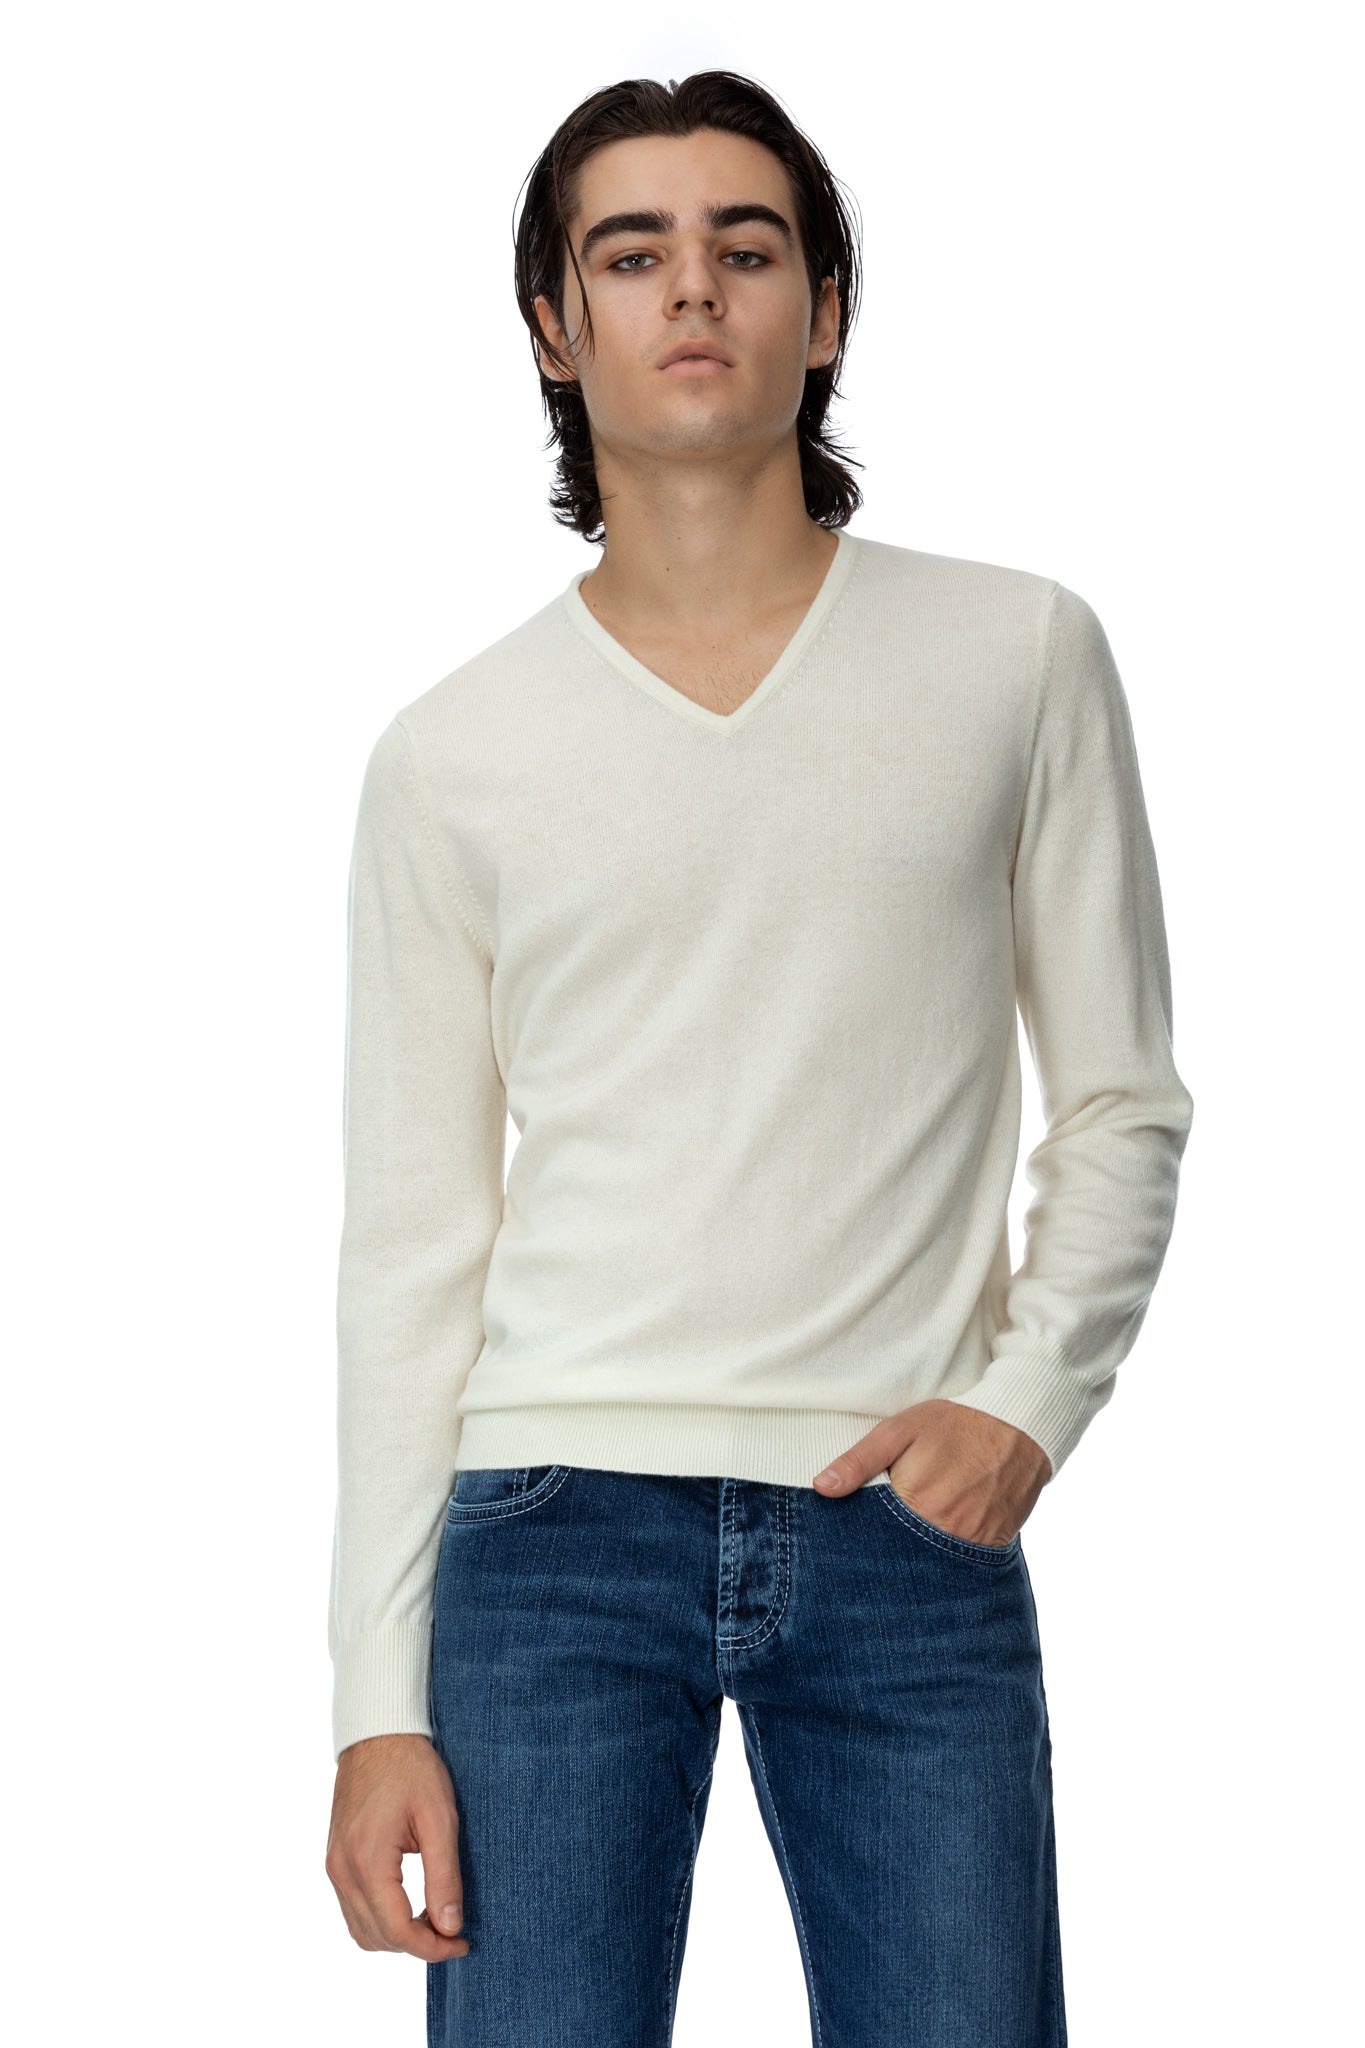 White sweater with V-neck made of merino wool and cashmere